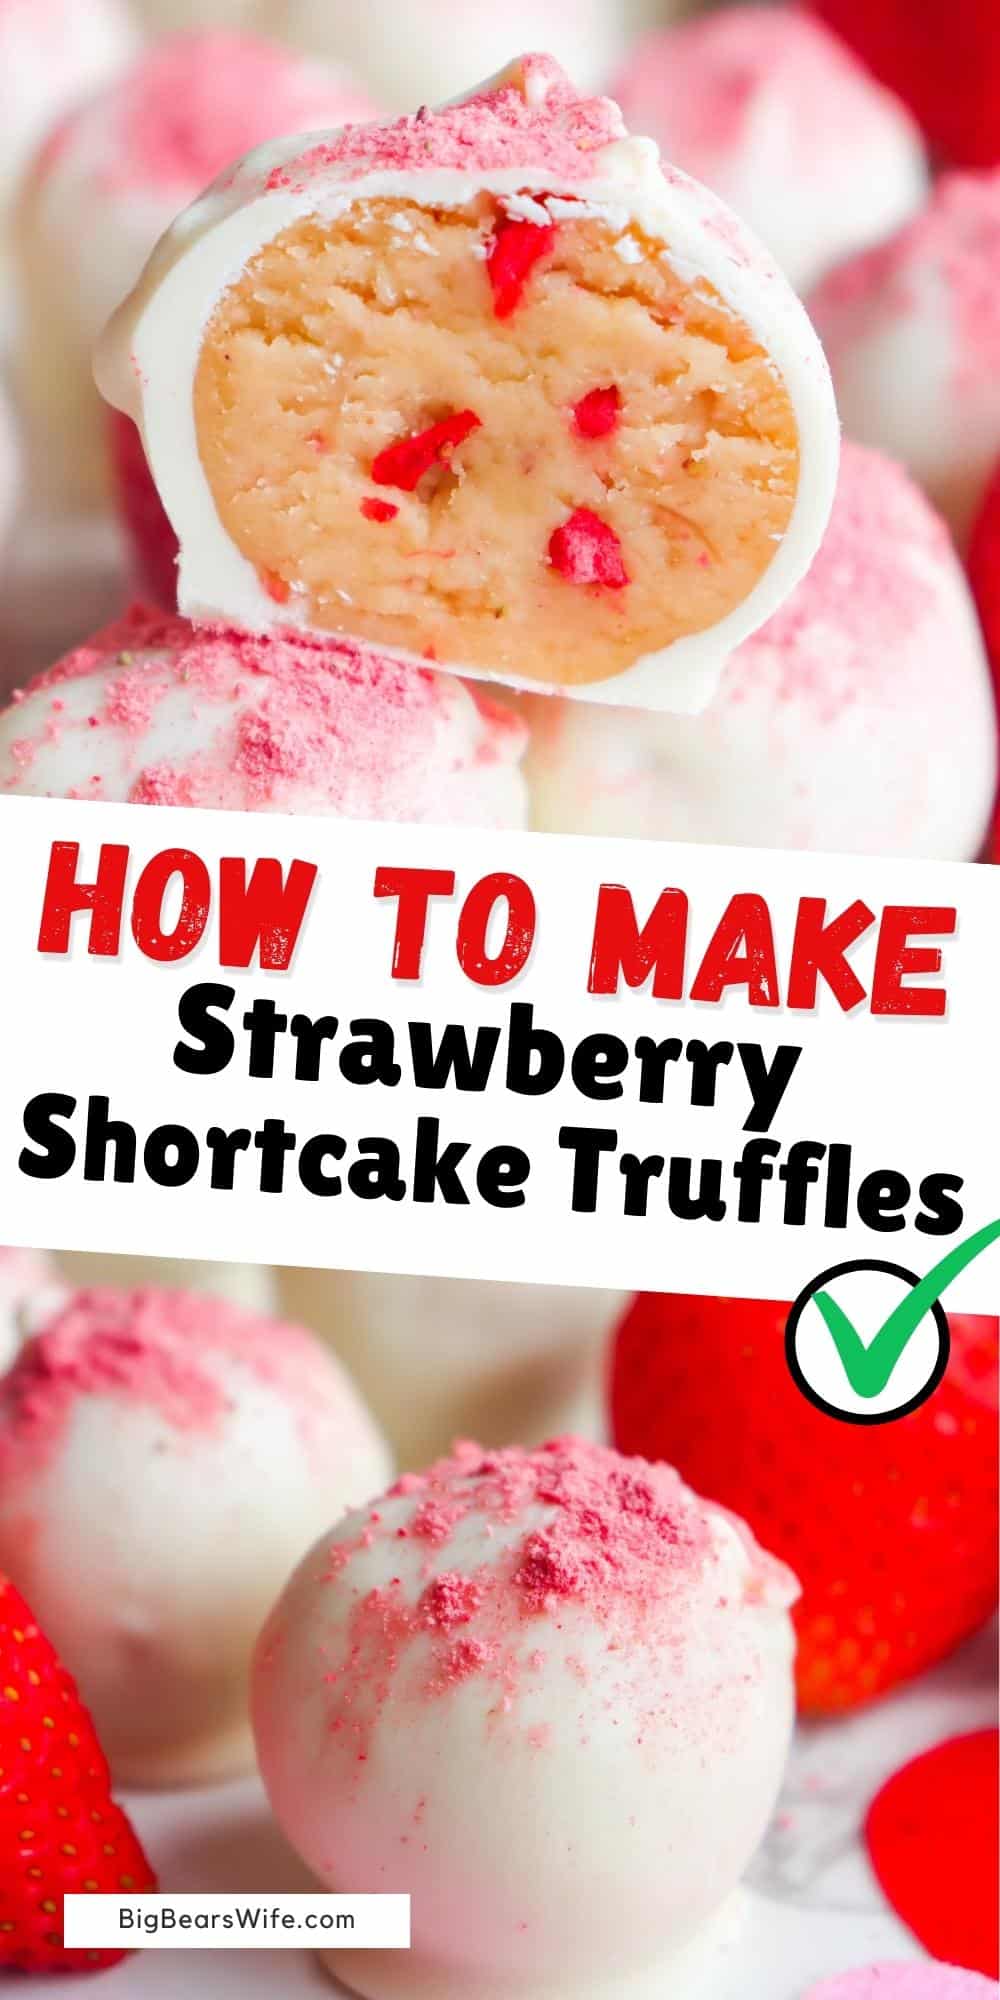 These Strawberry Shortcake Truffles taste just like strawberry shortcake and they’re the perfect dessert for sharing! Pack these up for your Valentine or display them on a cake plate for a party!  via @bigbearswife